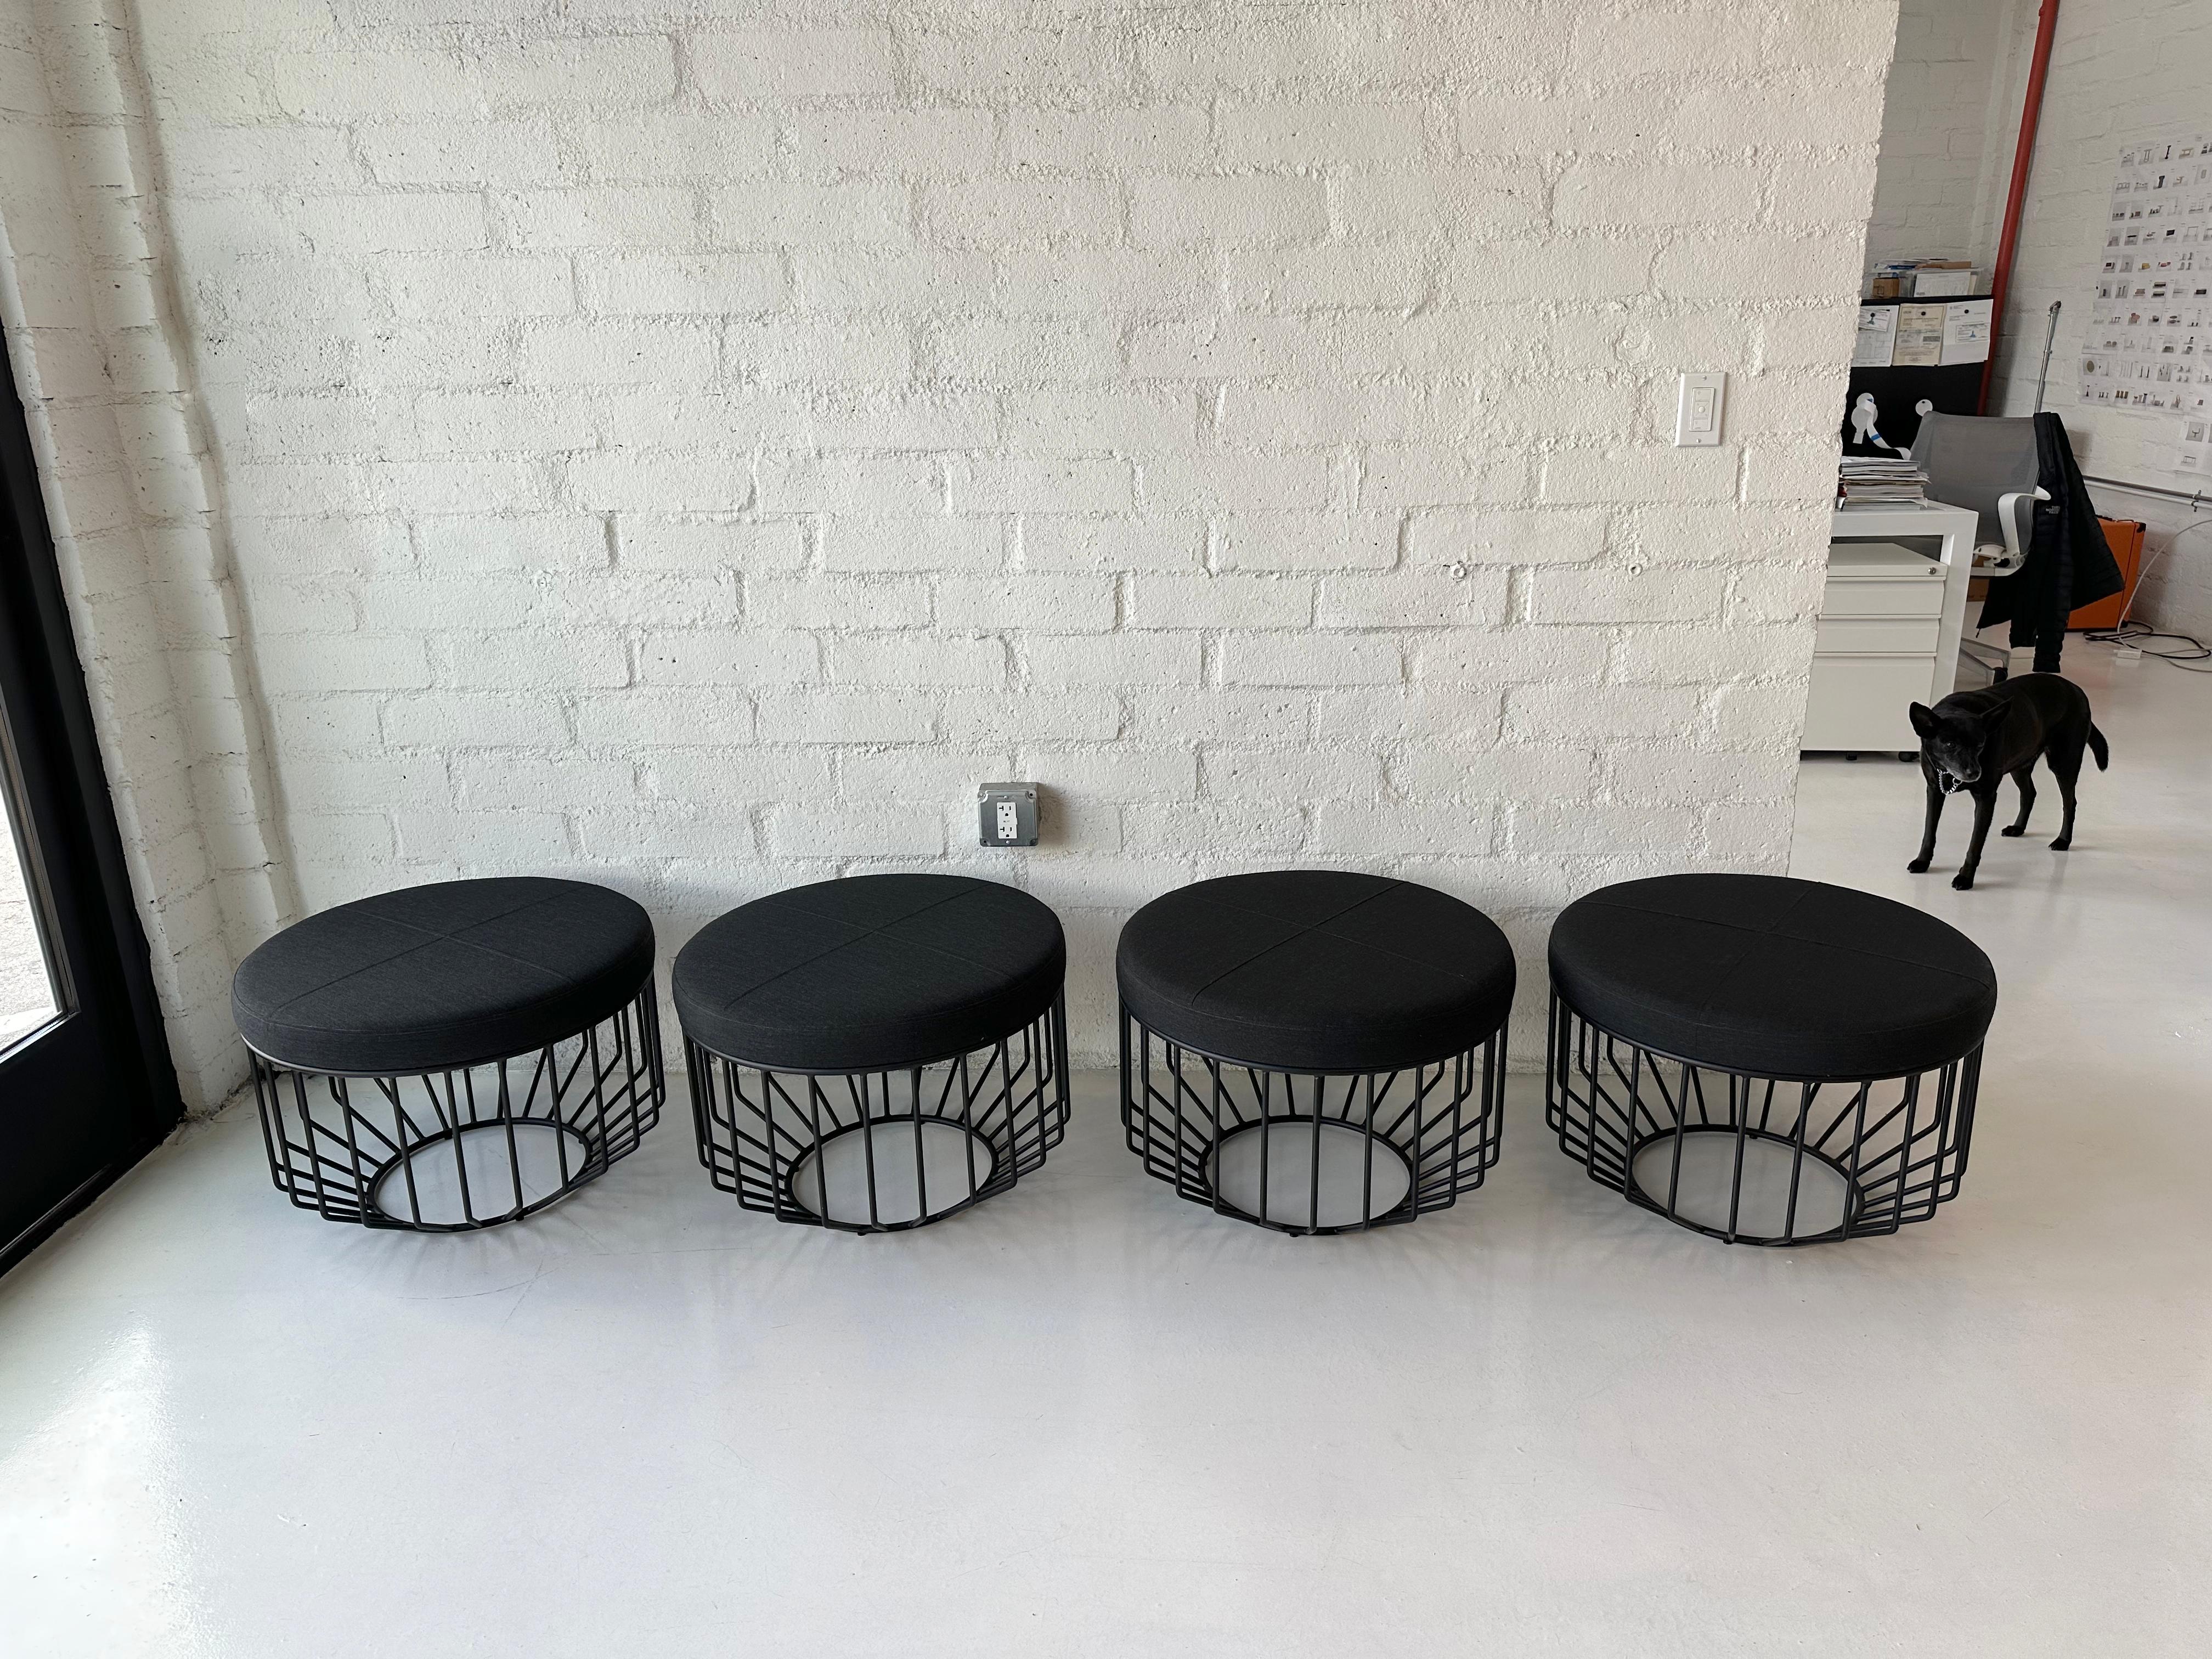 Contemporary Wired Ottoman, by Phase Design, Flat Black & Kvadrat Remix Fabric For Sale